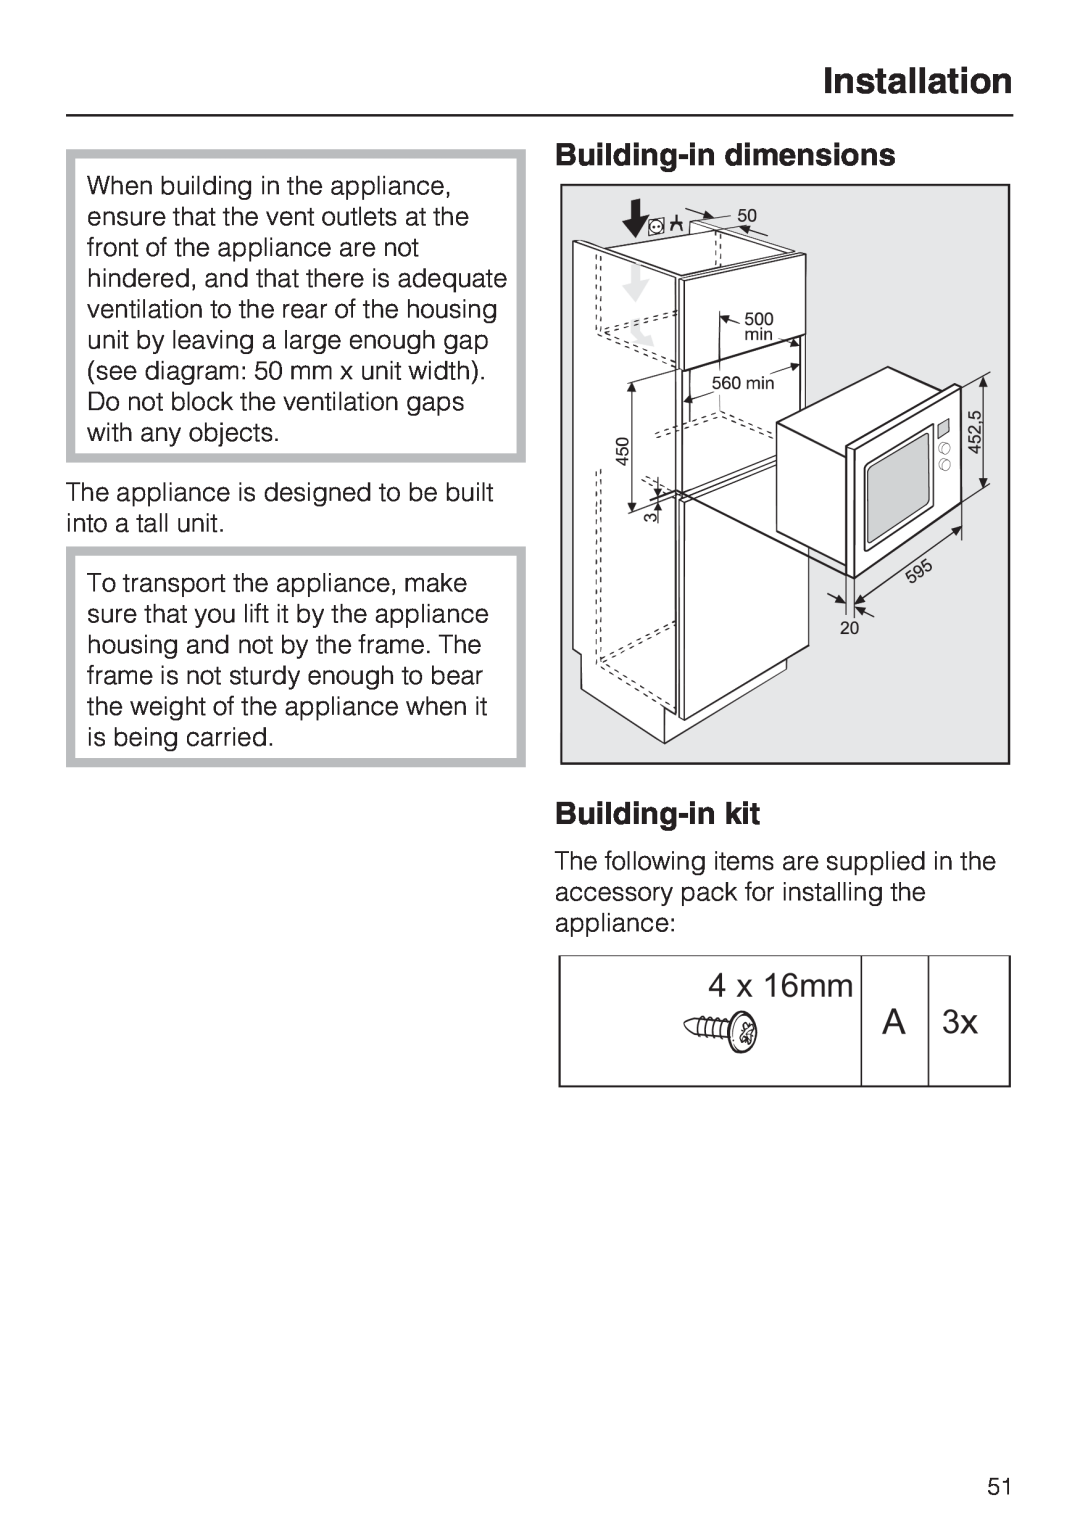 Miele M 8261-1 manual Installation, Building-indimensions Building-inkit, 4 x 16mm 